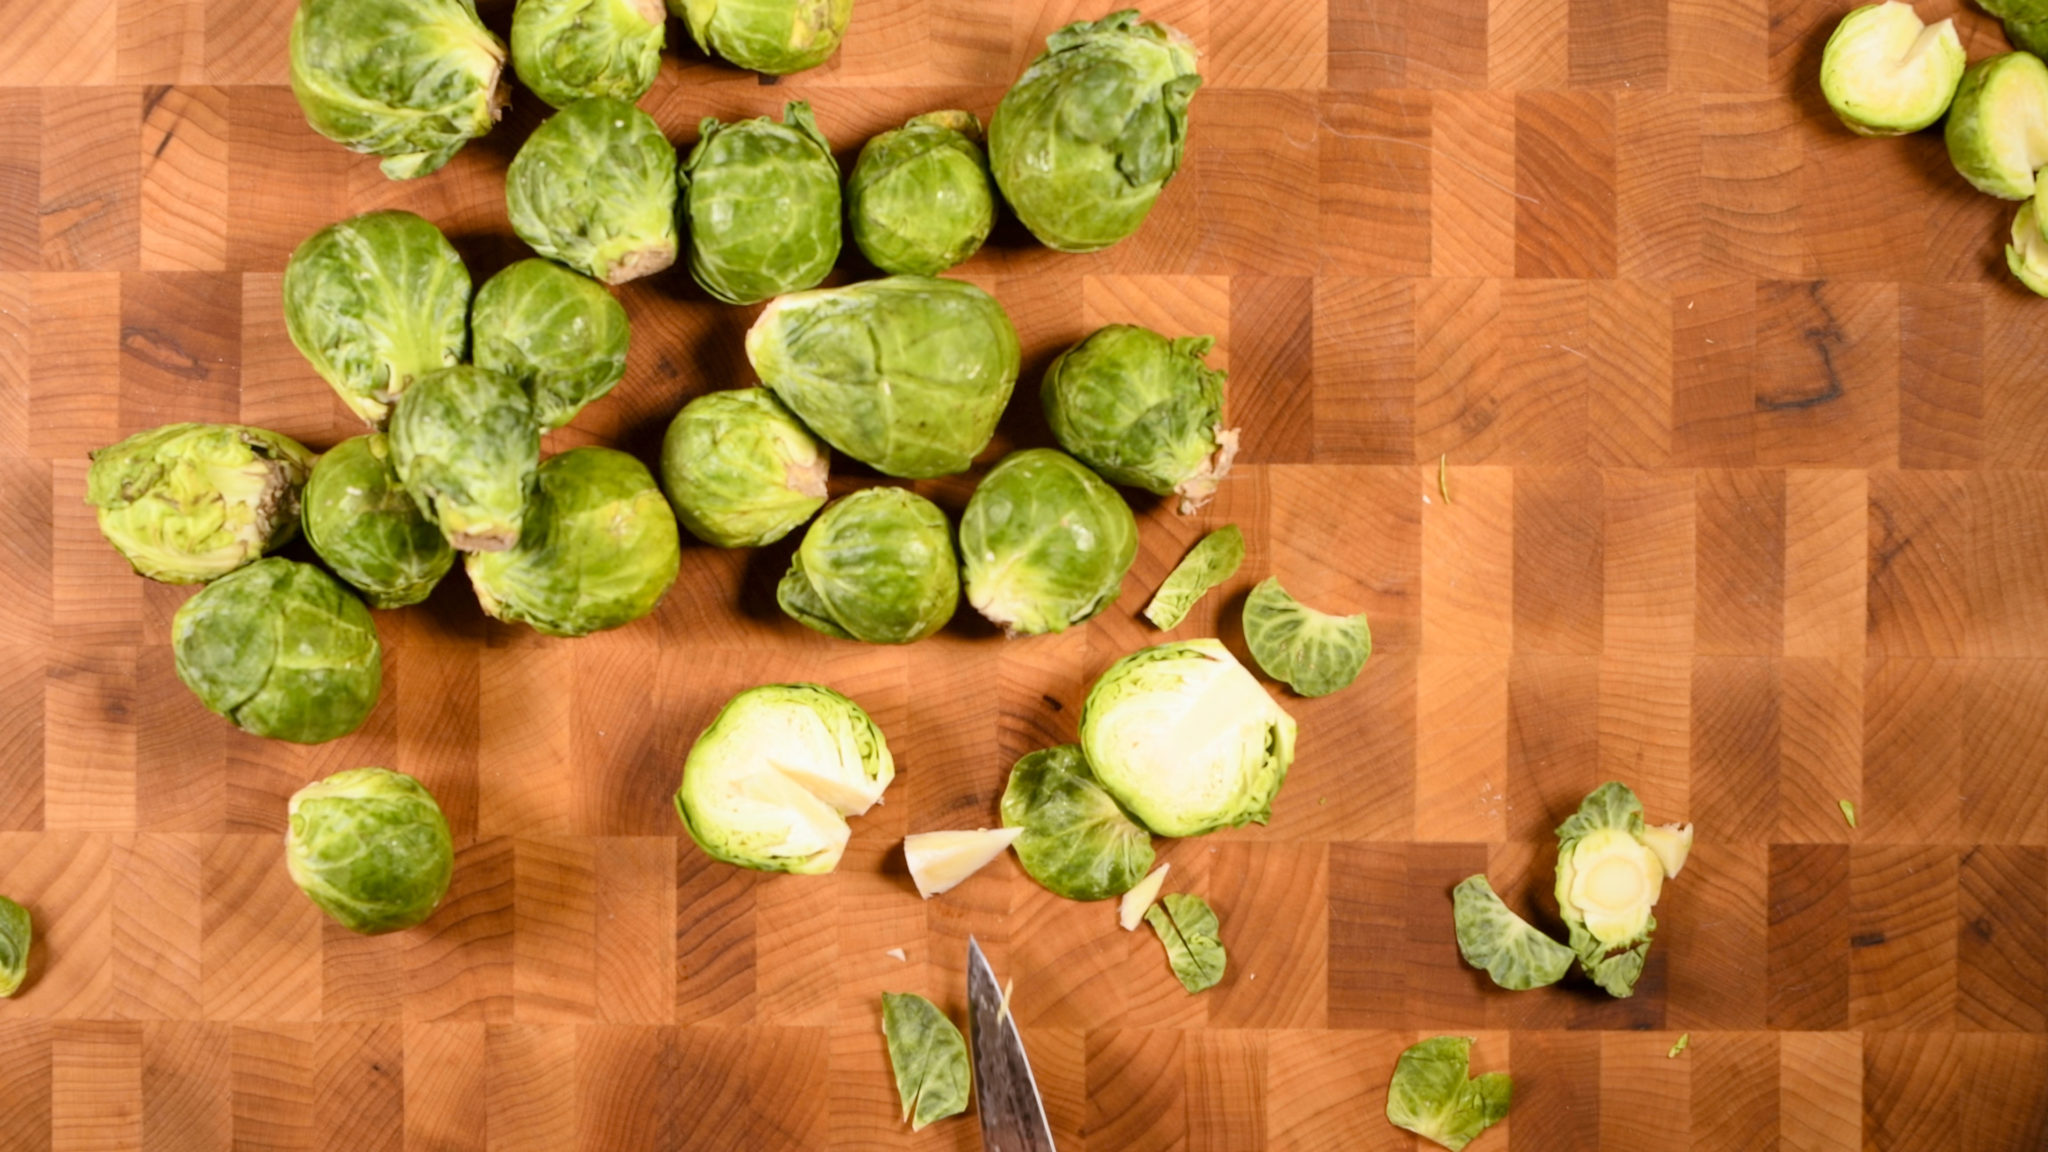 Preparing Brussels sprouts